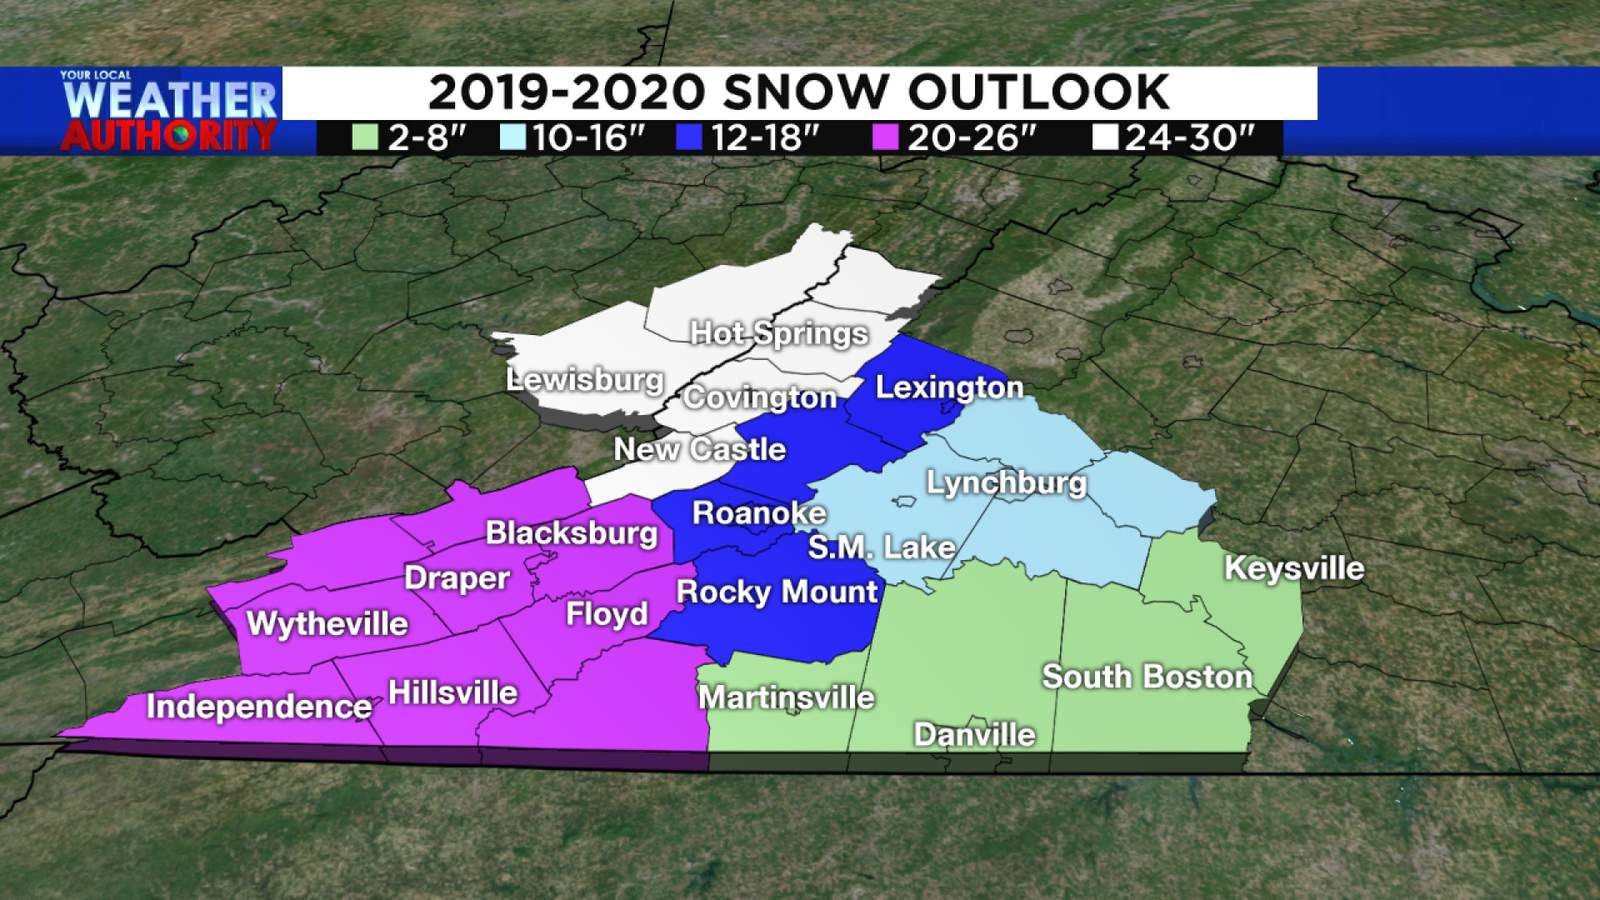 Your Local Weather Authority’s 2019-2020 winter forecast